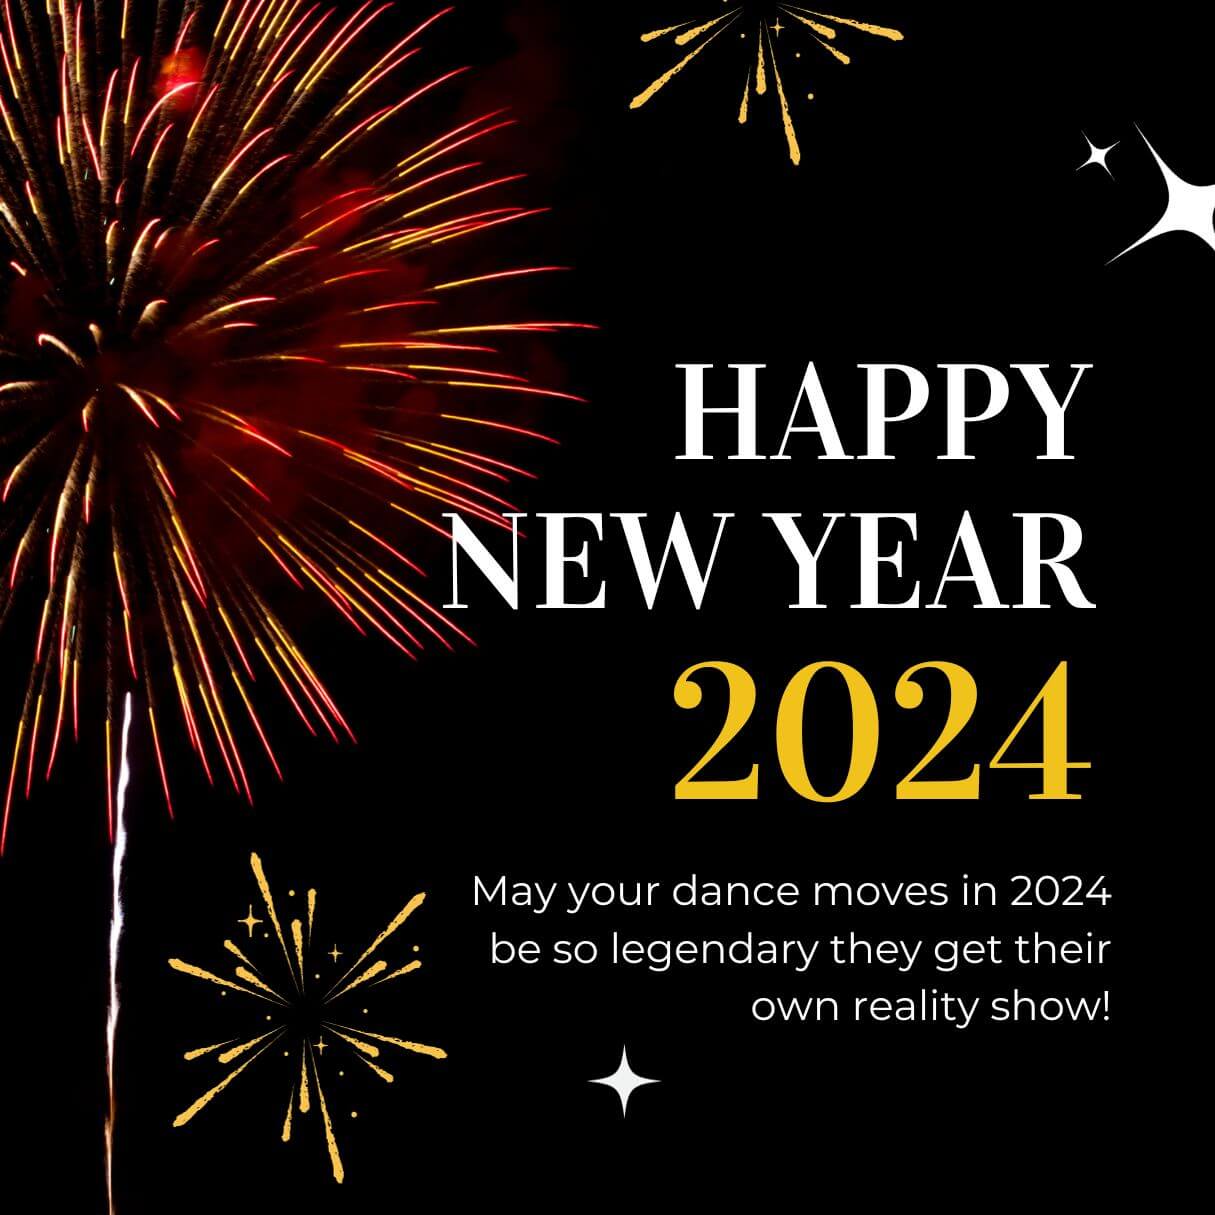 Funny Happy 2024 New Year Greetings